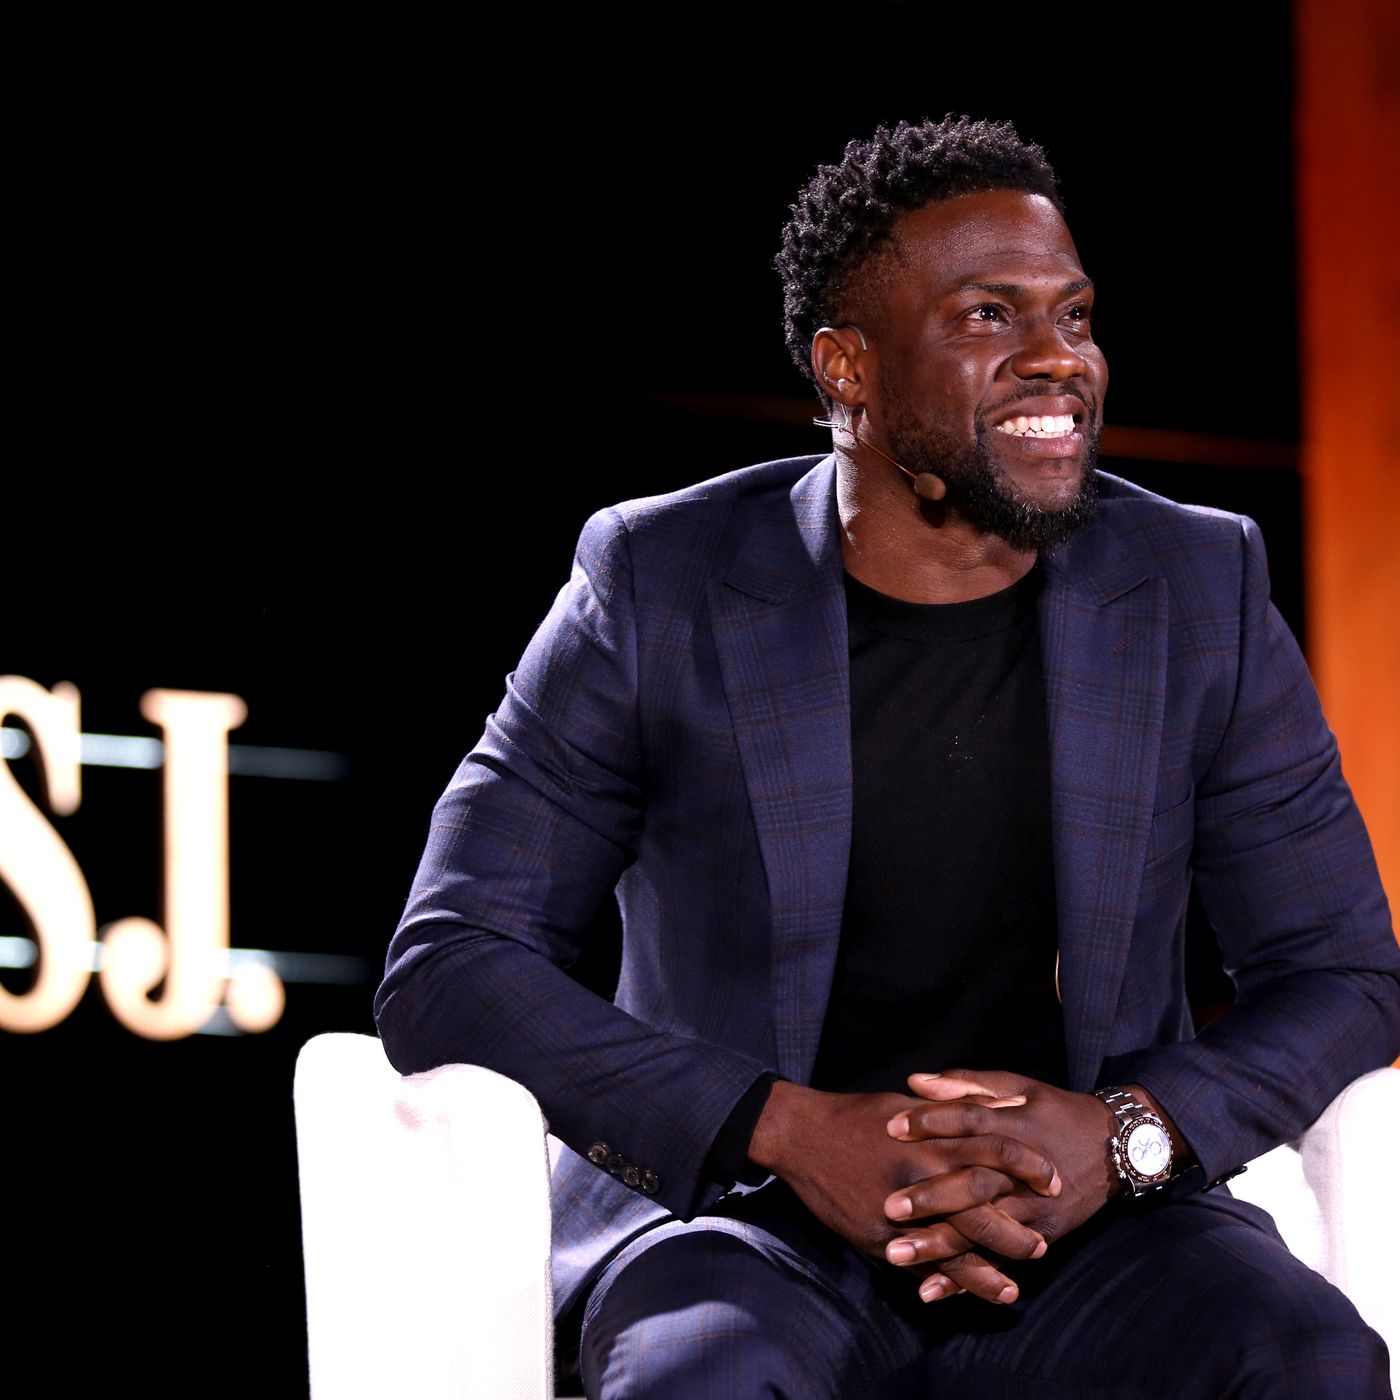 how Kevin Hart Tweeted Himself Out Of A Job Hosting The Oscars The Verge